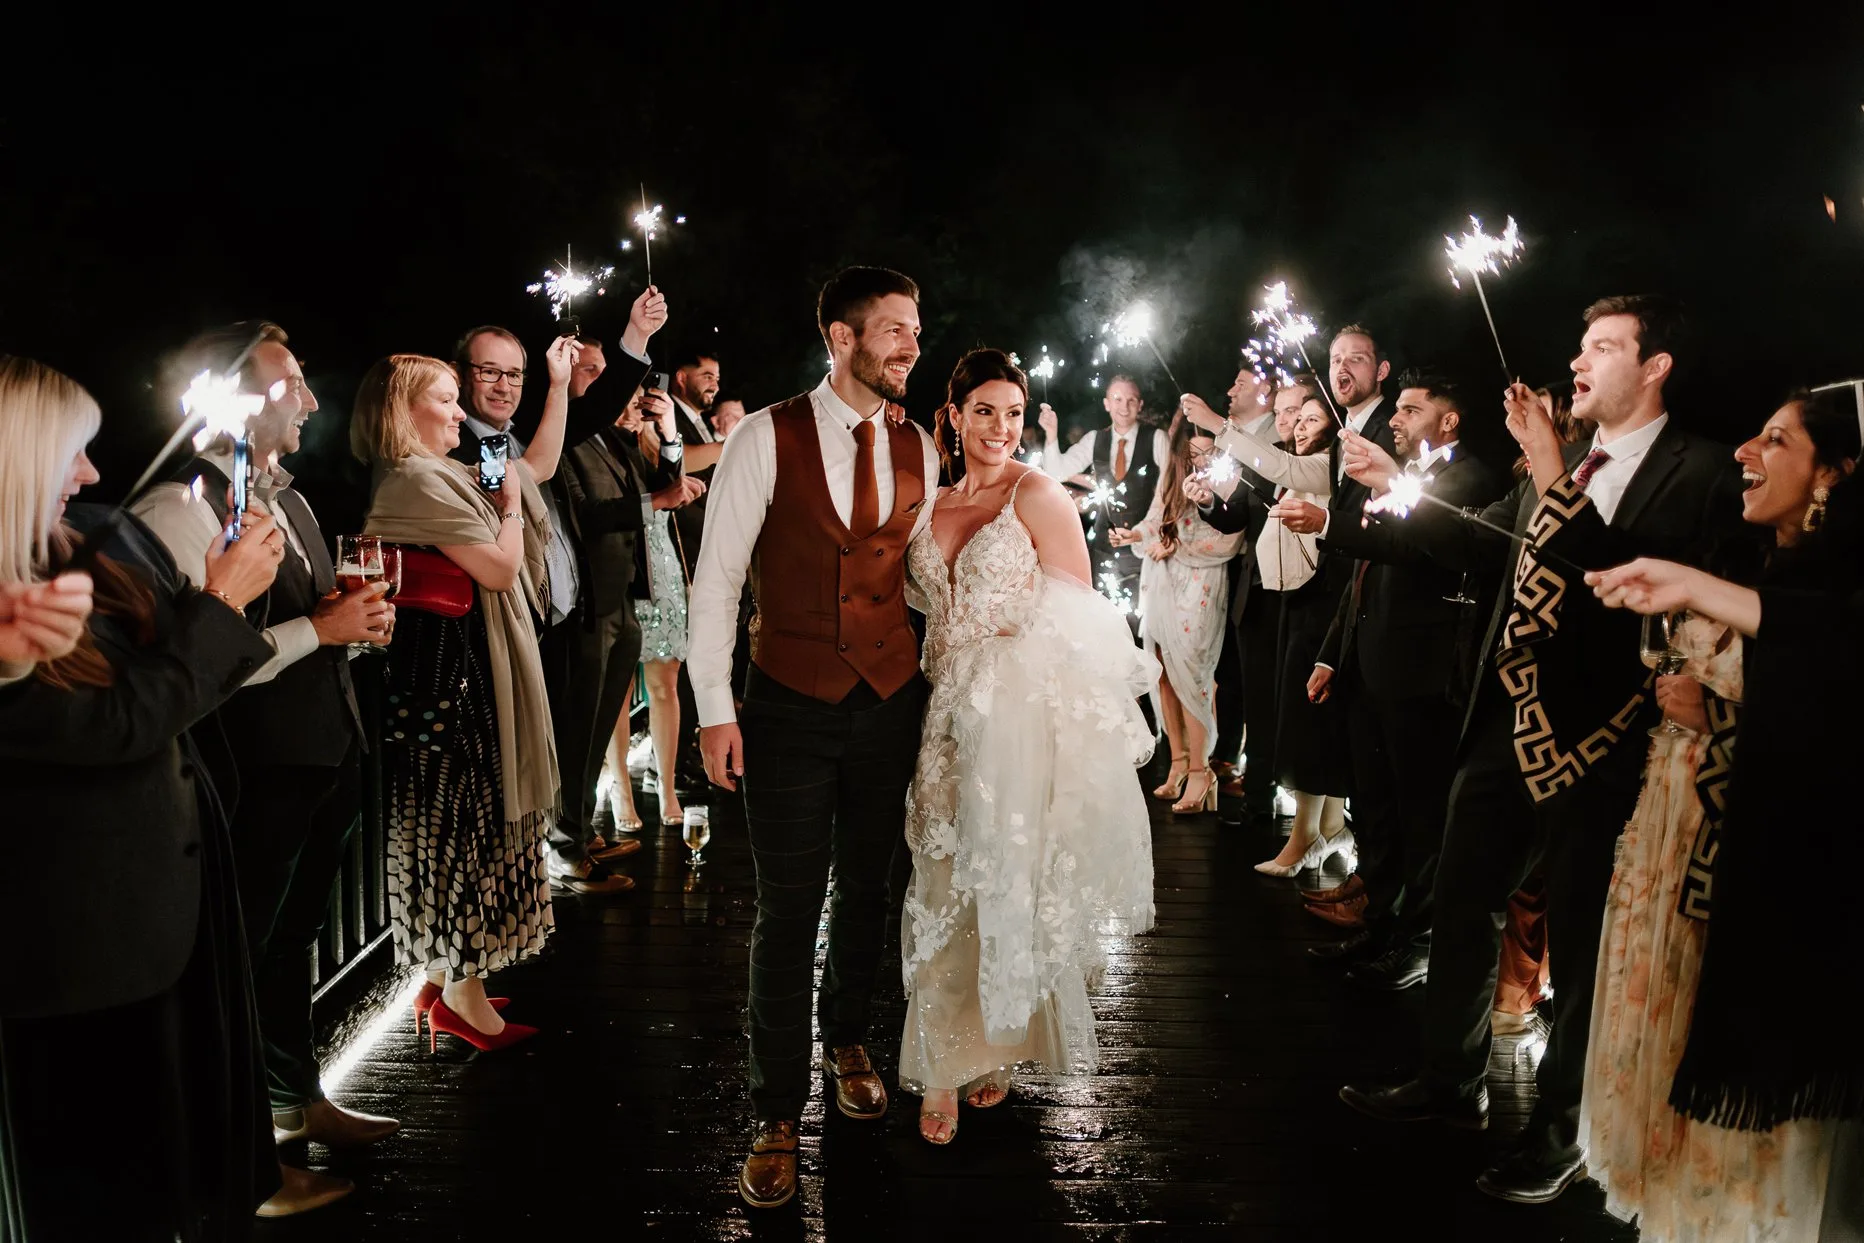 Bride and groom walking through a sparkler tunnel at Oaklands wedding venue in Driffield. Wedding guests stand either side of them holding sparklers in the air.